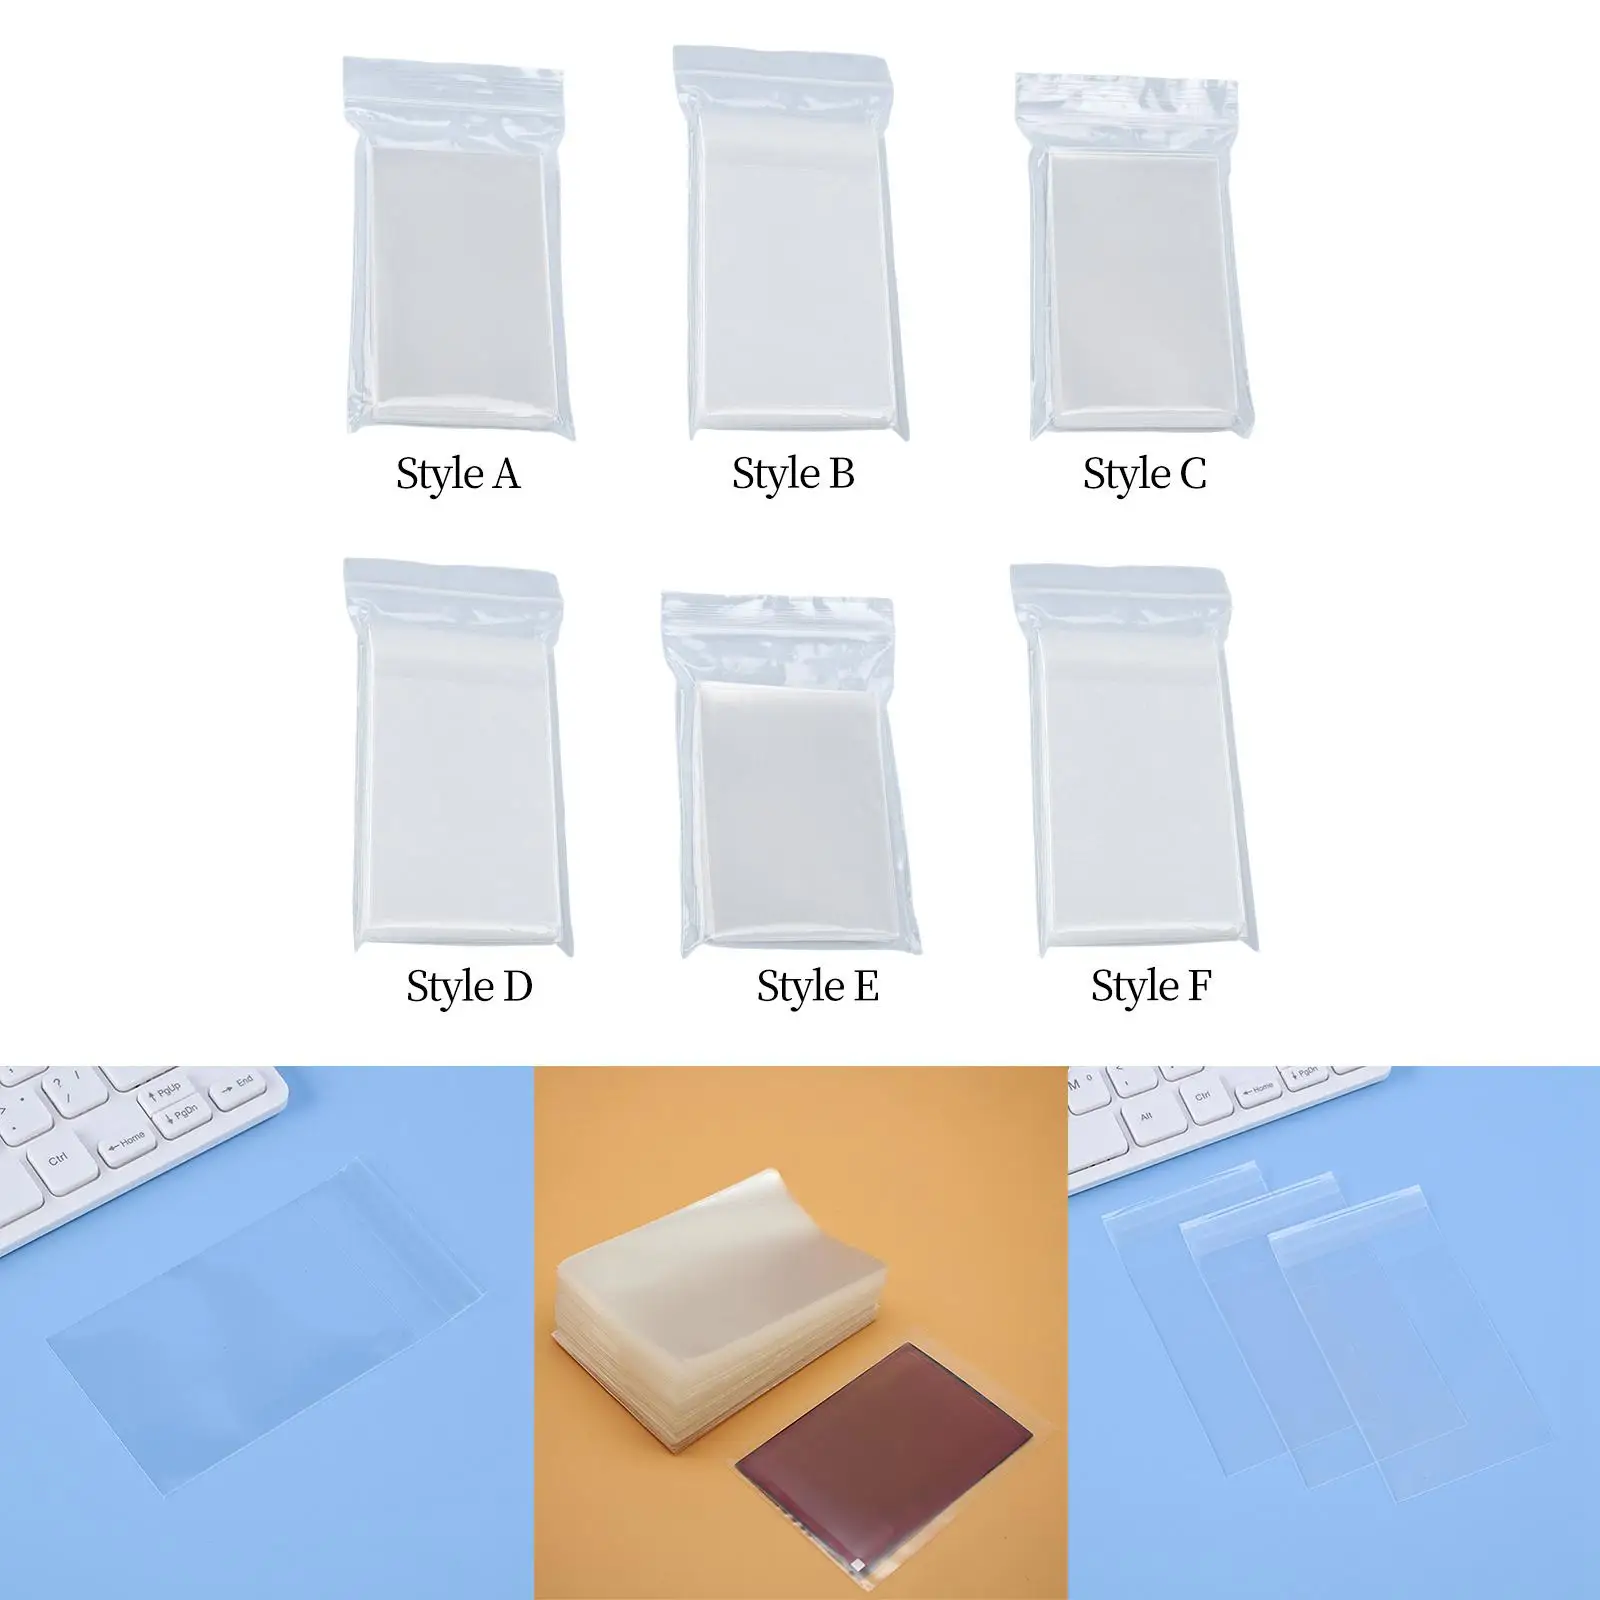 50x Card Sleeves Card Protectors for Sports Cards Collecting Card Games